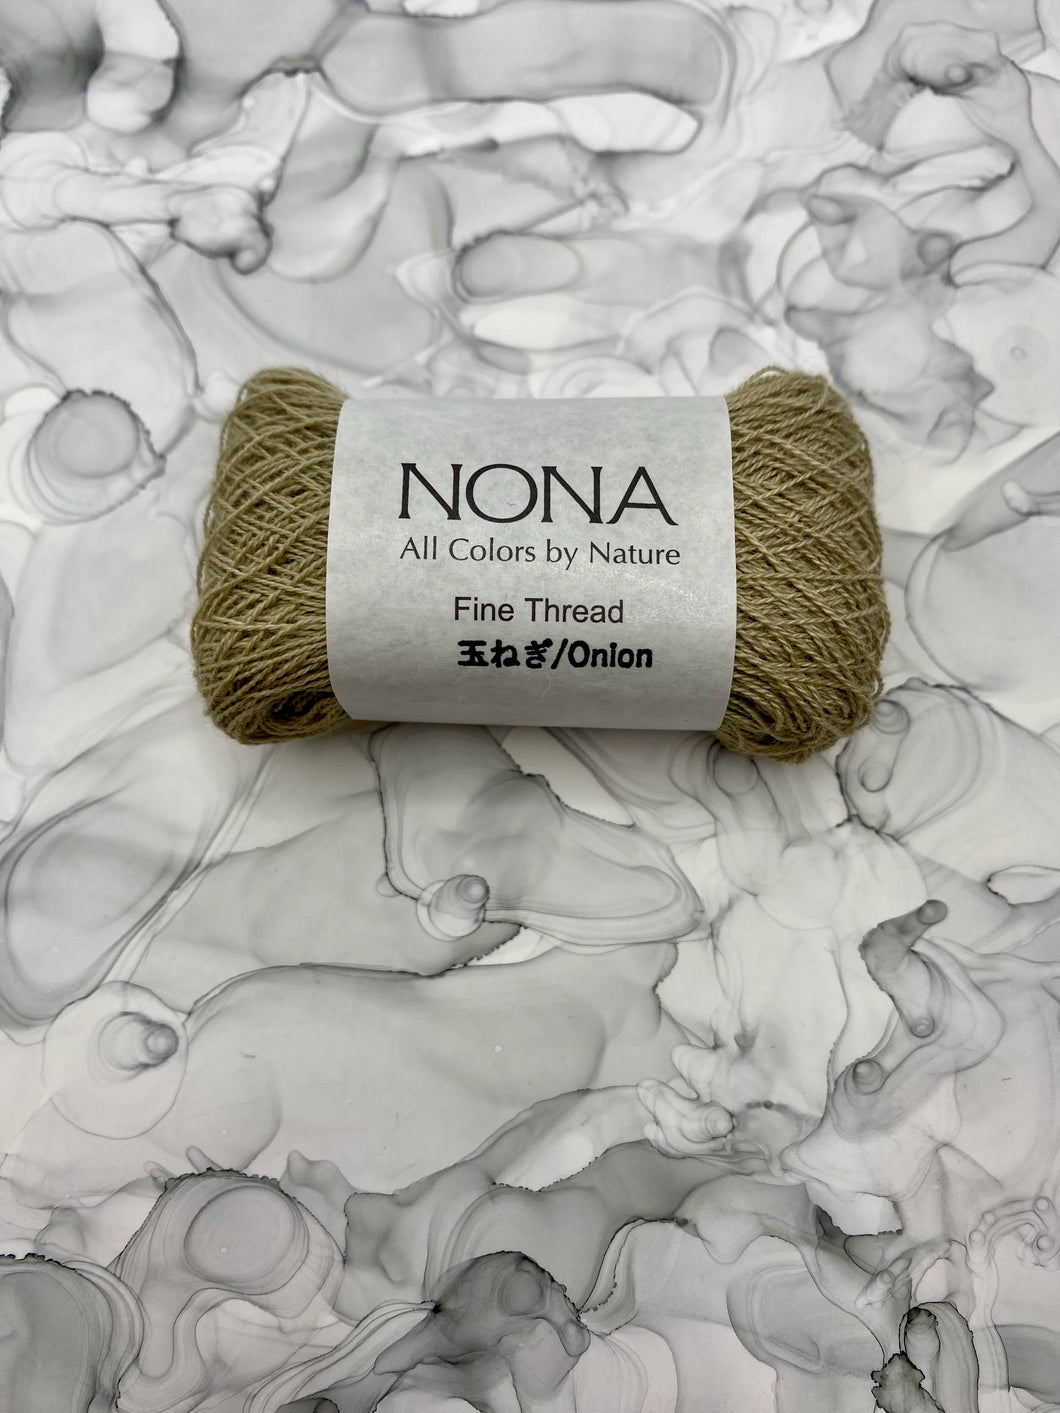 Nona Naturally Dyed Thread - Last Chance Colors!